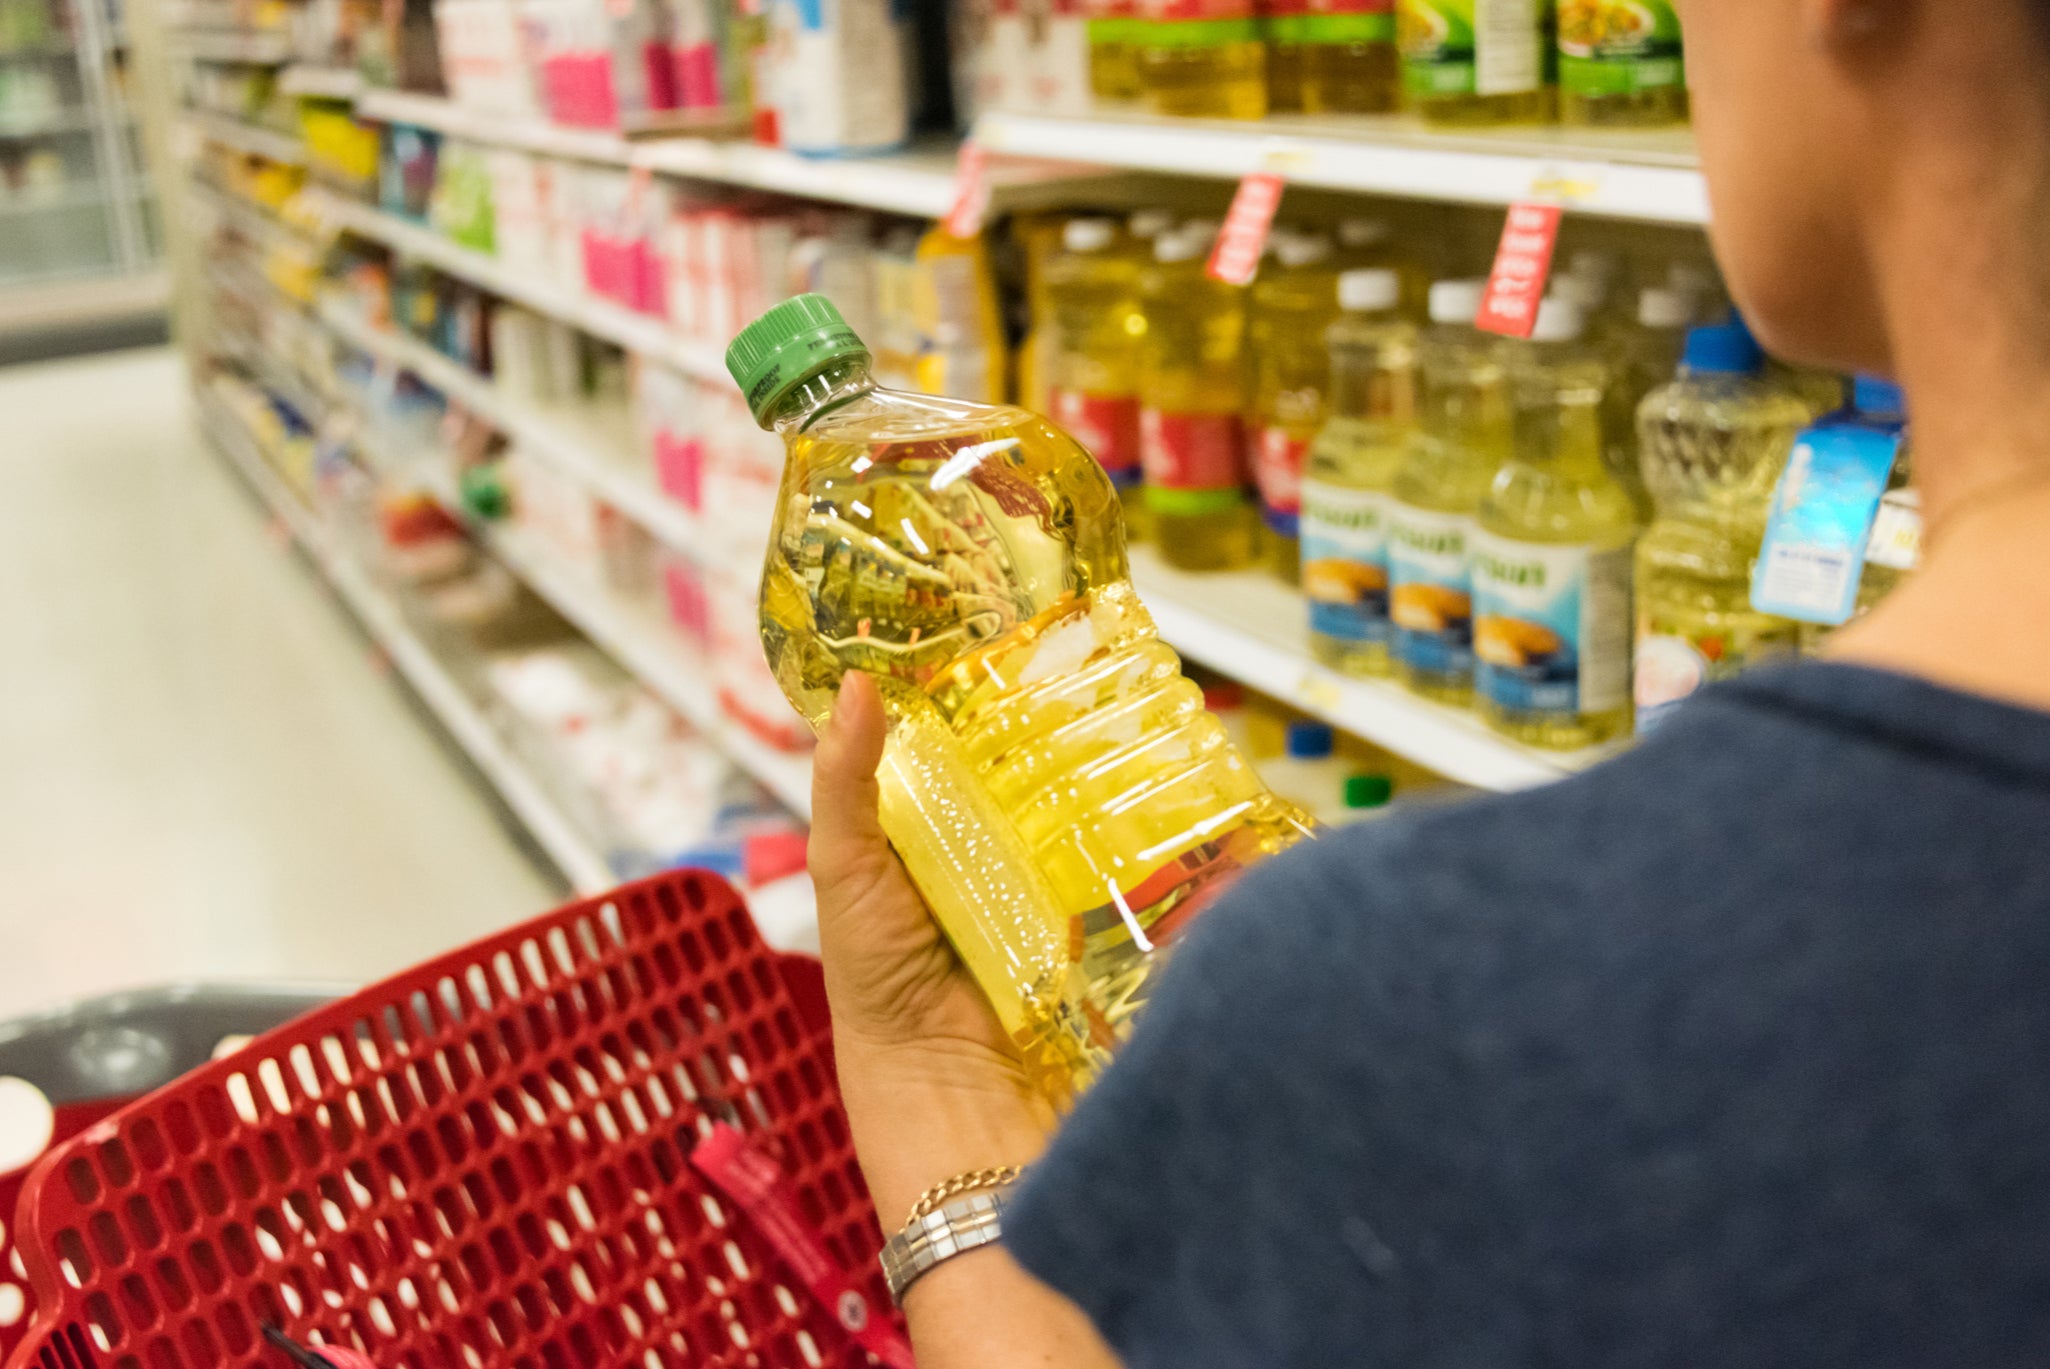 Some consumers are opting for alternative cooking oils amid the price hike